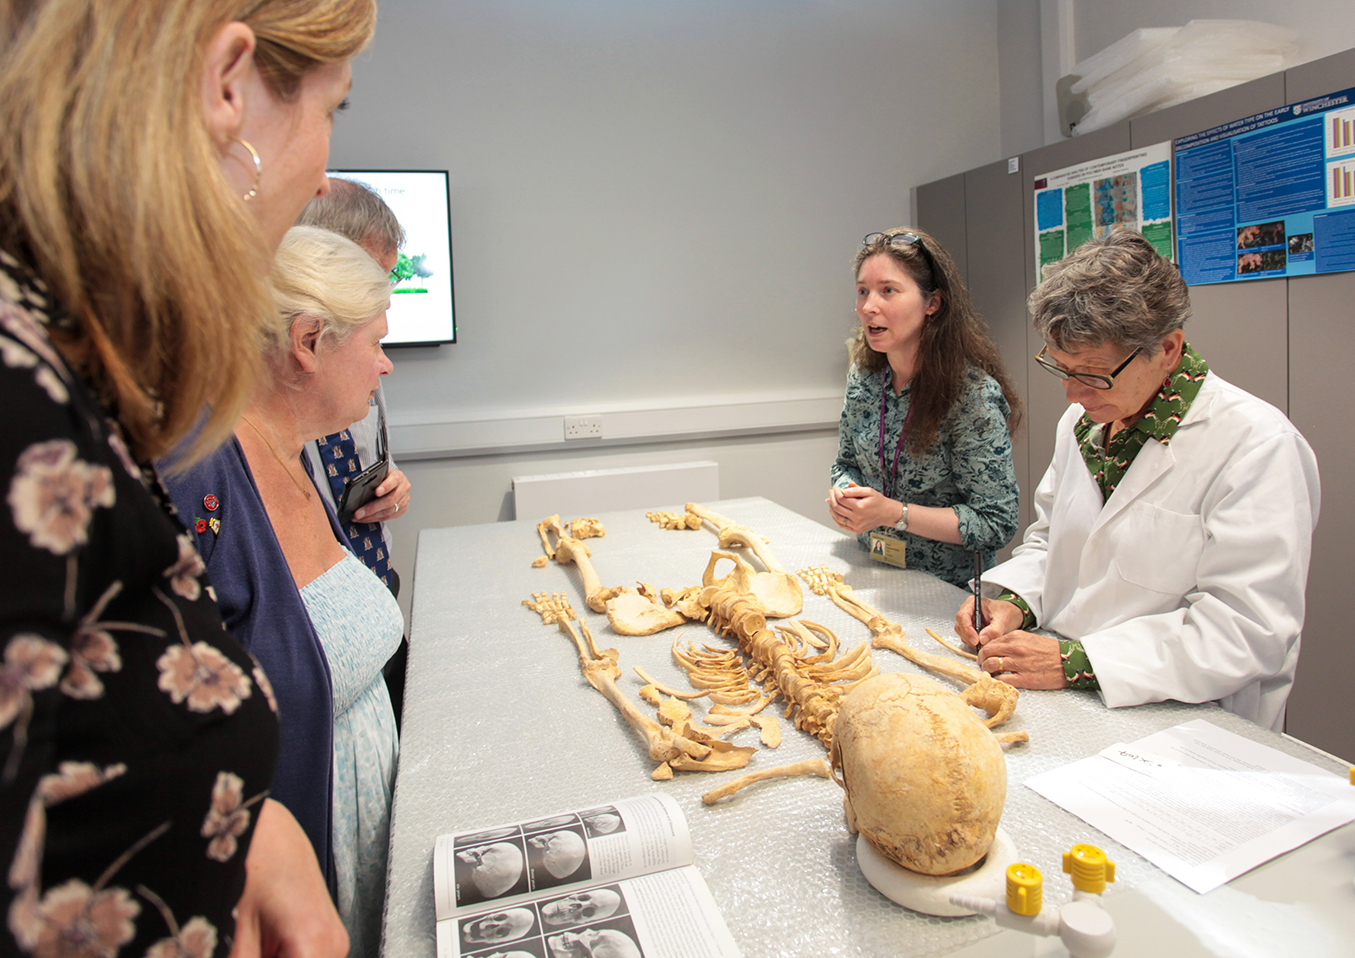 An academic explaining forensic science to members of the public in a laboratory, with a skeleton laid out on a table